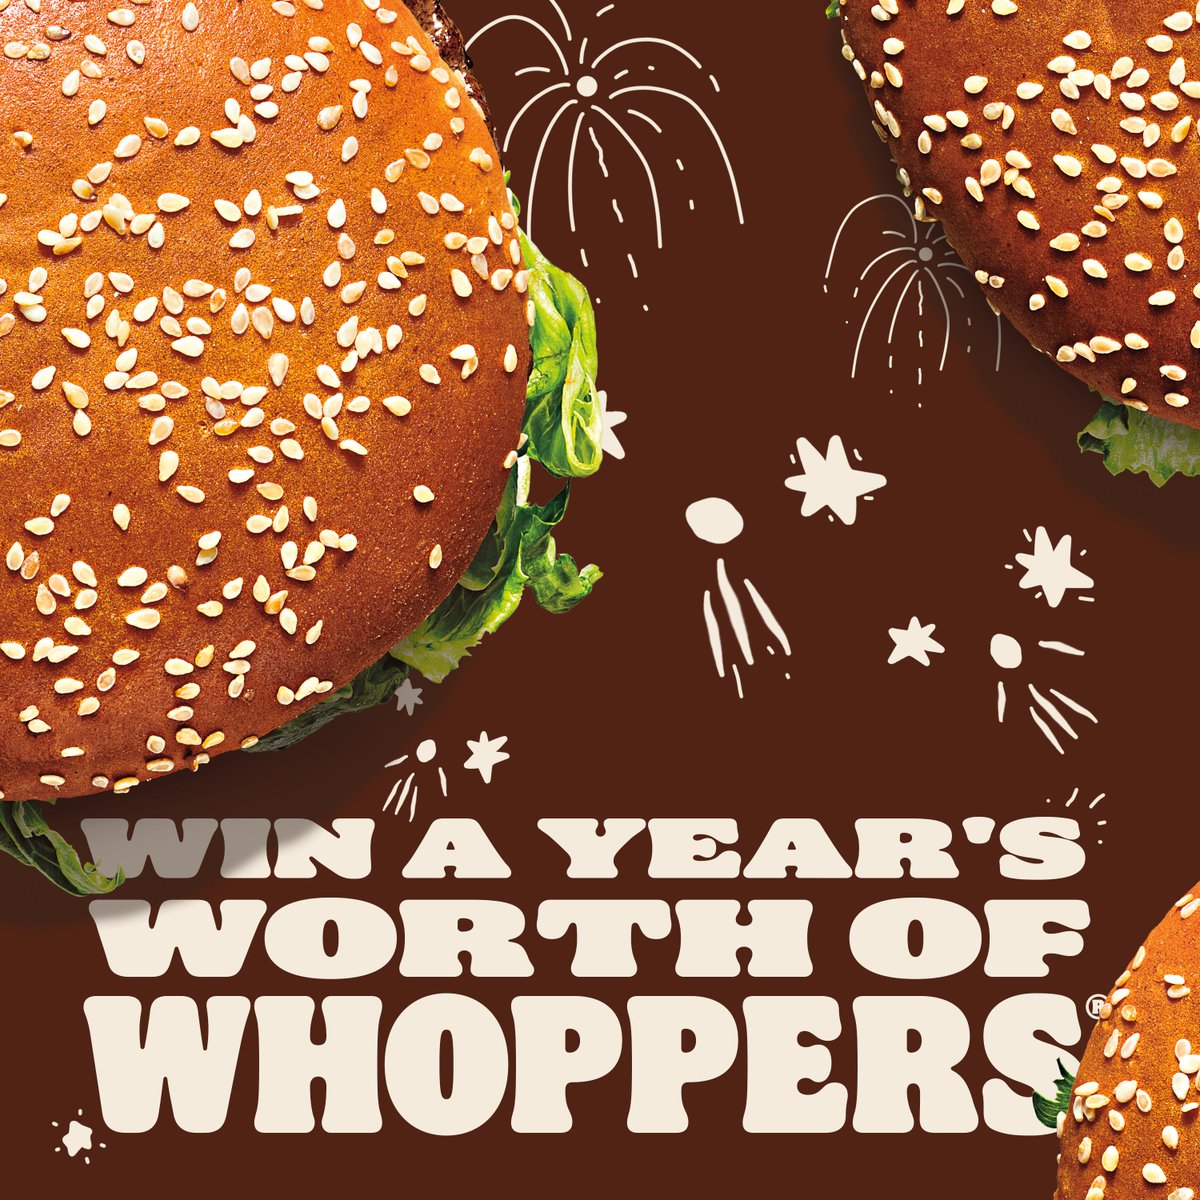 🚨 WIN A YEAR'S WORTH OF WHOPPERS 🚨 To celebrate the new year we want to give one lucky follower a year's worth of Whoppers! To be in with a chance of winning:  - follow us - retweet/like this post - comment 'new year new burgers' Good luck to all and happy new year!!